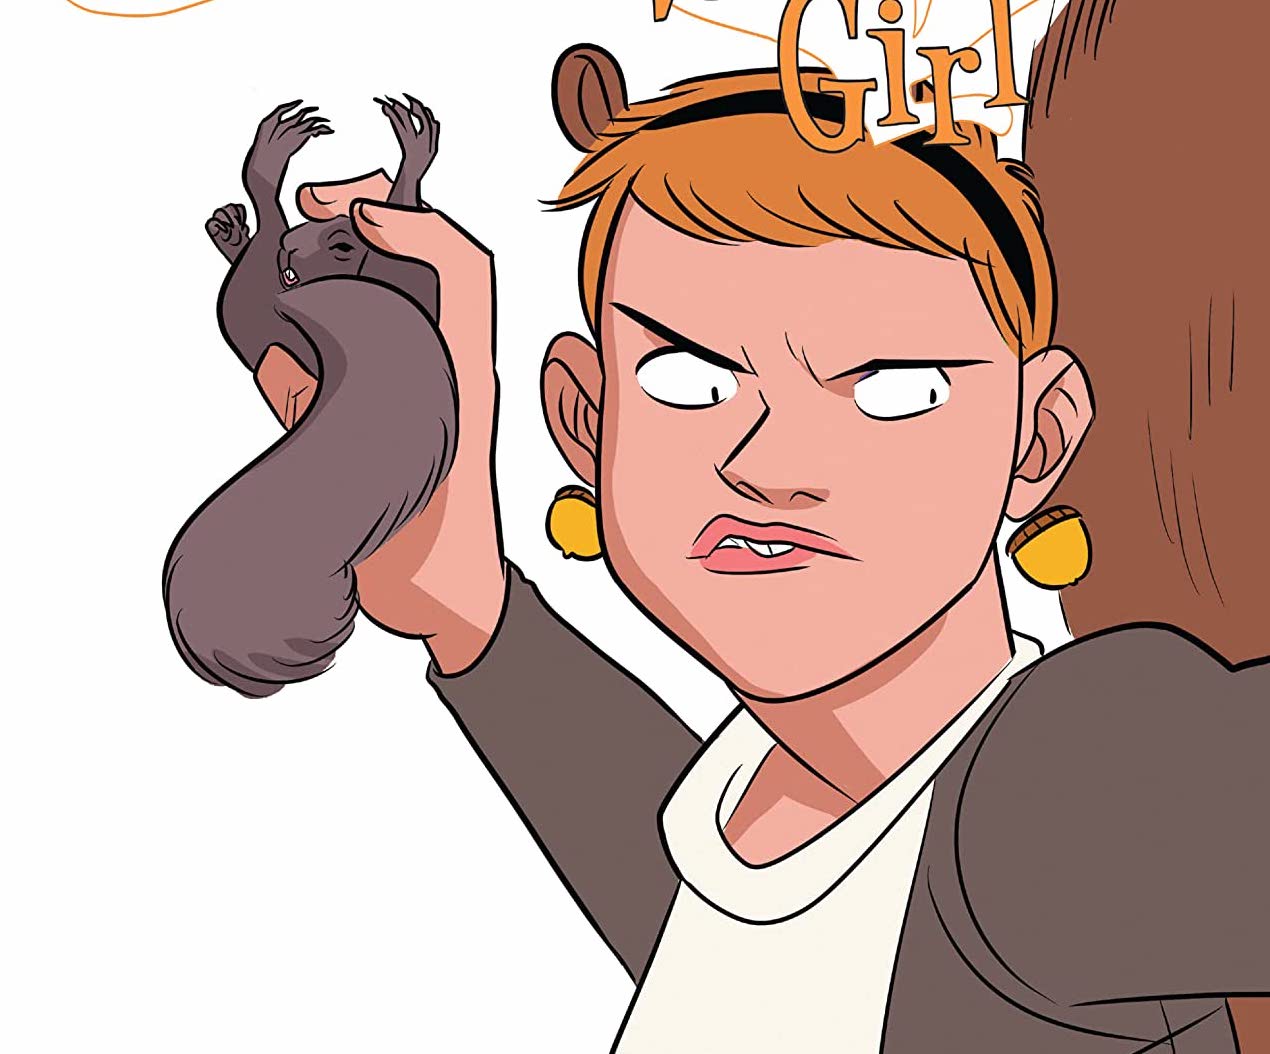 The Unbeatable Squirrel Girl: Squirrels Just Wanna Have Fun